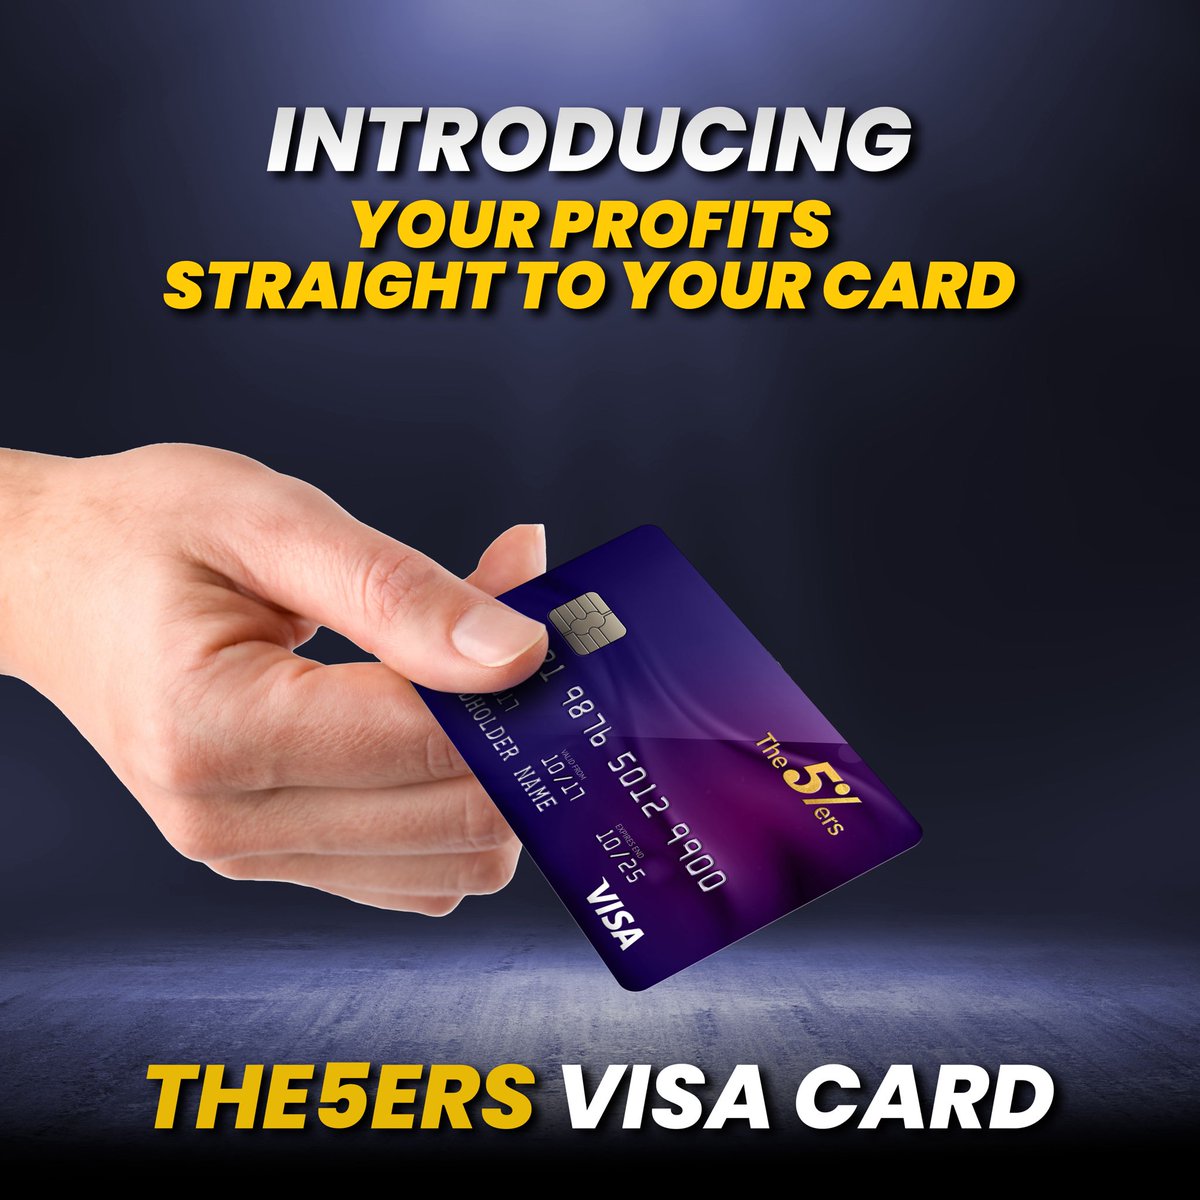 The5ers VISA Card 

We are excited to introduce The Future of Trading Payments - Get your profits directly into your pocket.

Endless benefits: 

🎯 Instant Spending
🪪 Pay anywhere
💳 Contactless/POS Payments
💸 ATM Cash Withdrawals
🌍 Worldwide Card Payments
🔐 Enhanced